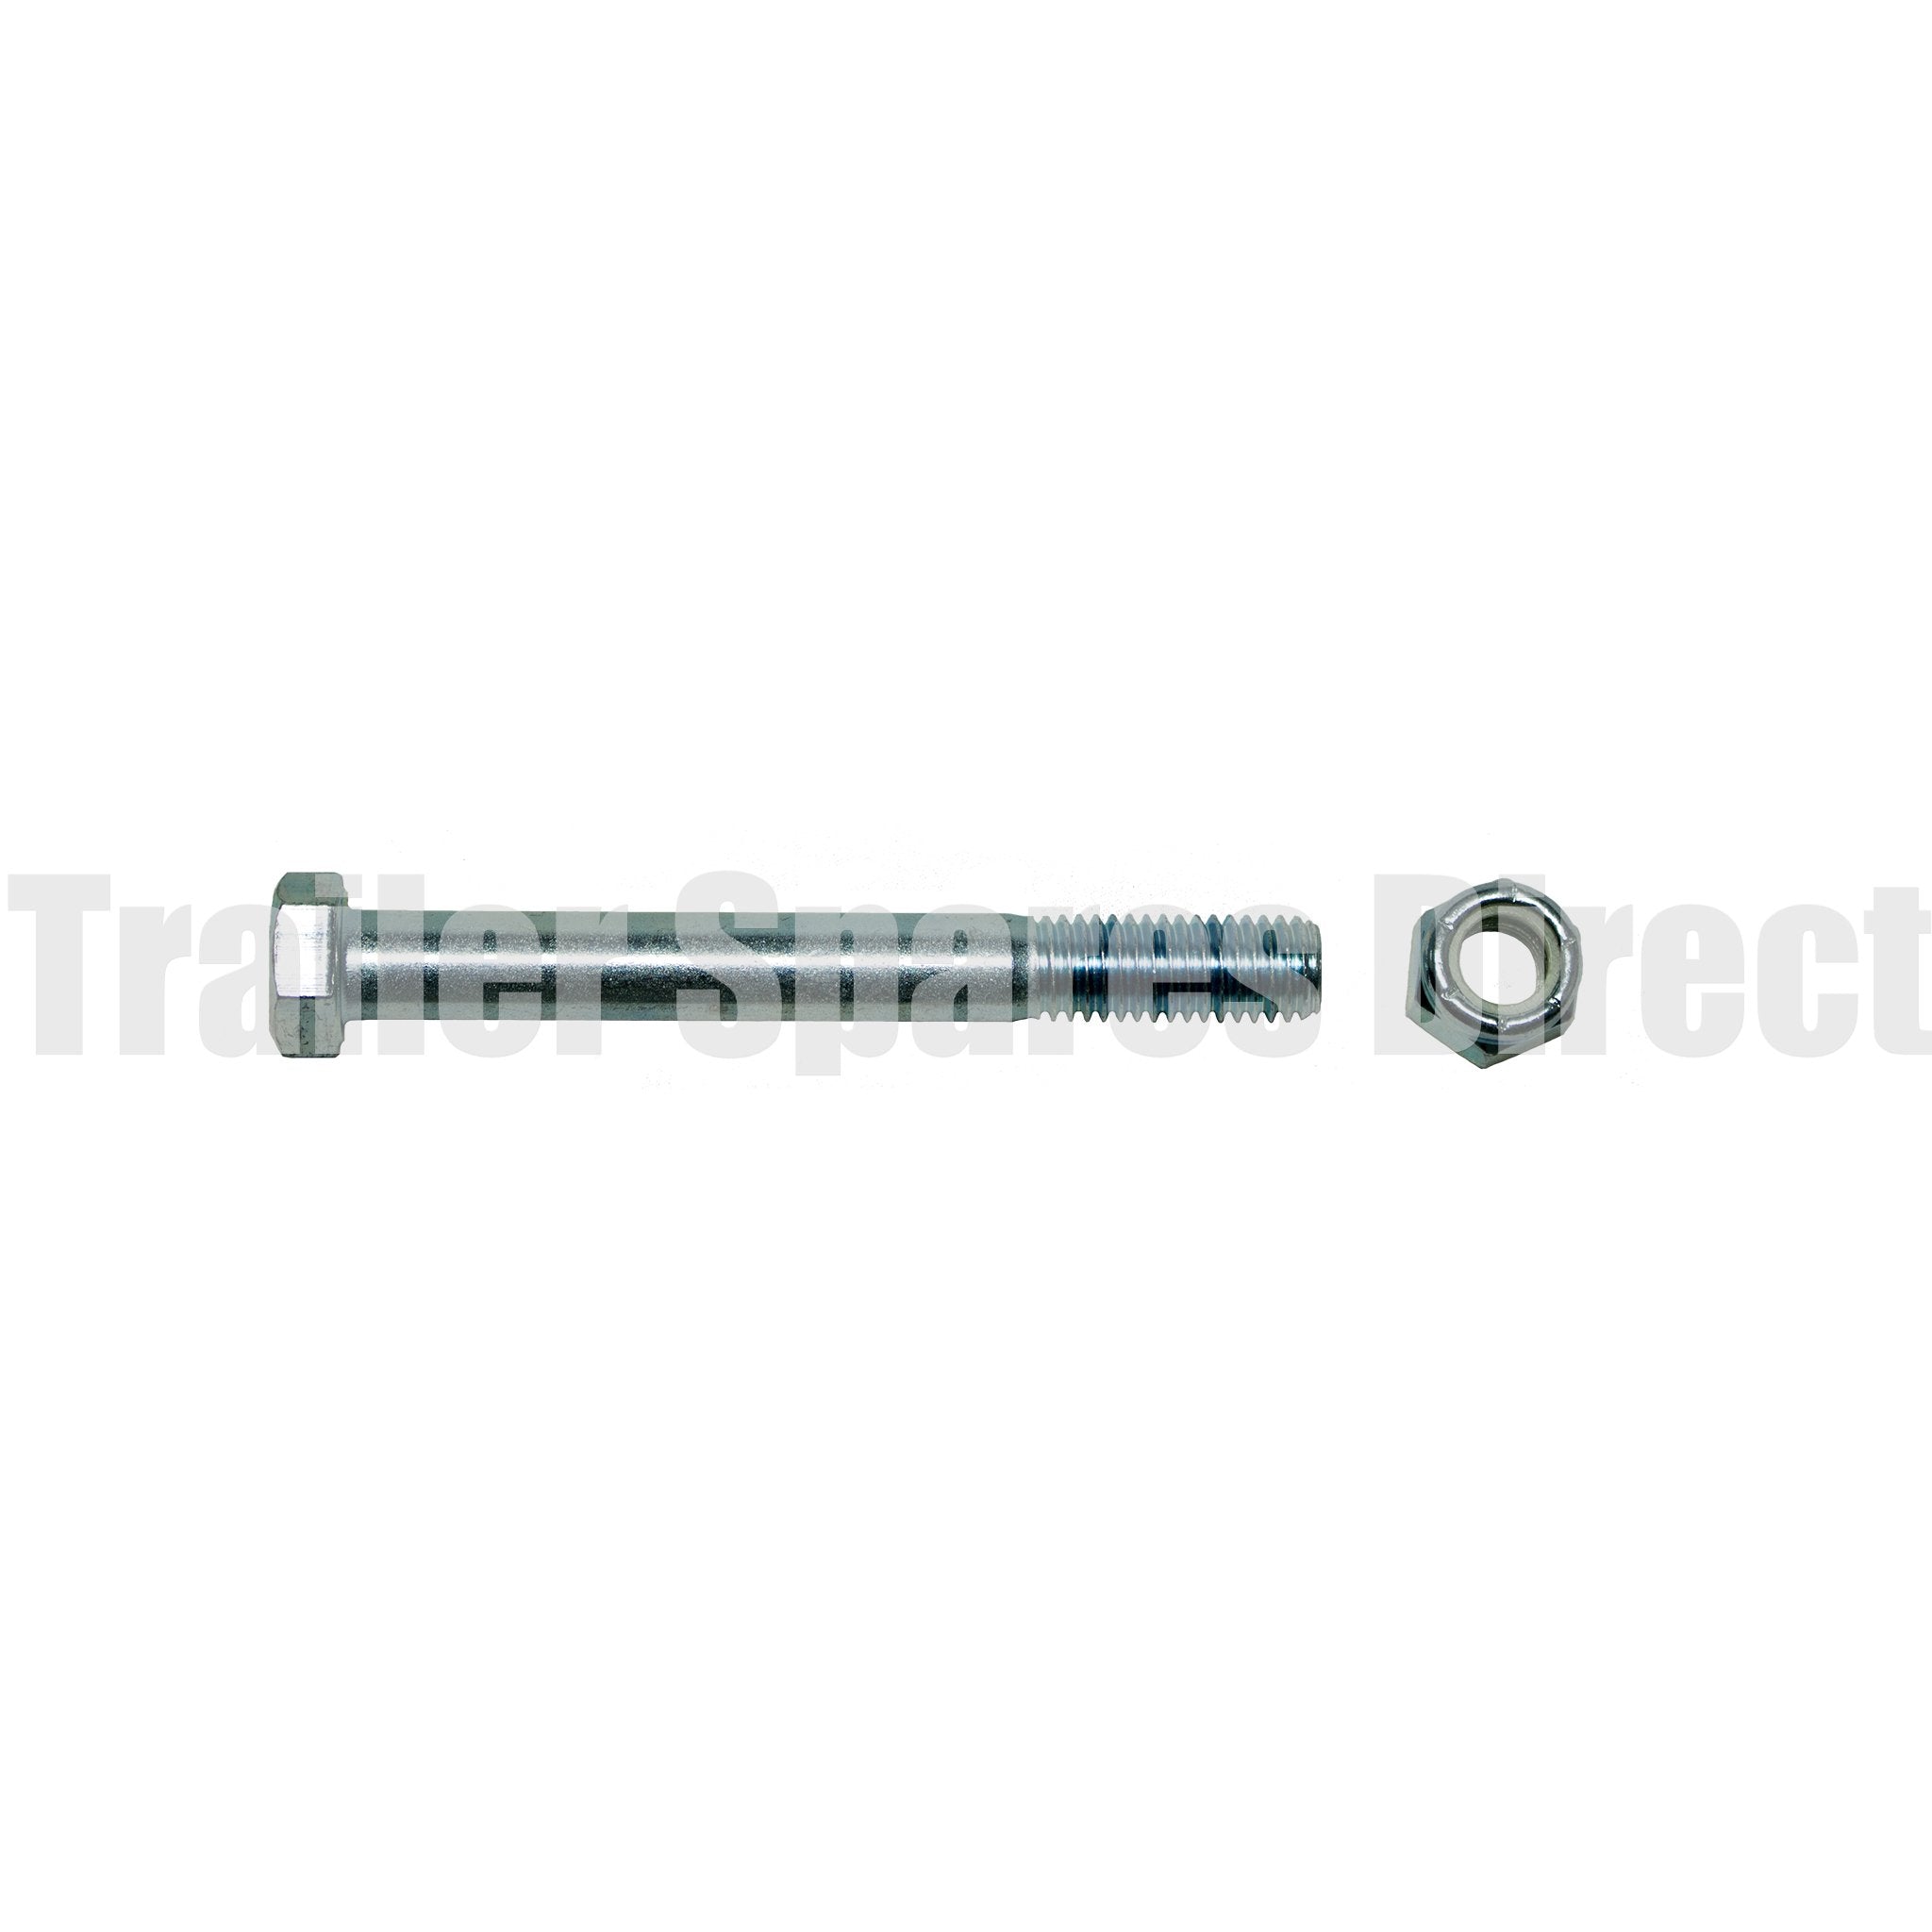 Coupling bolt 4.5 inch